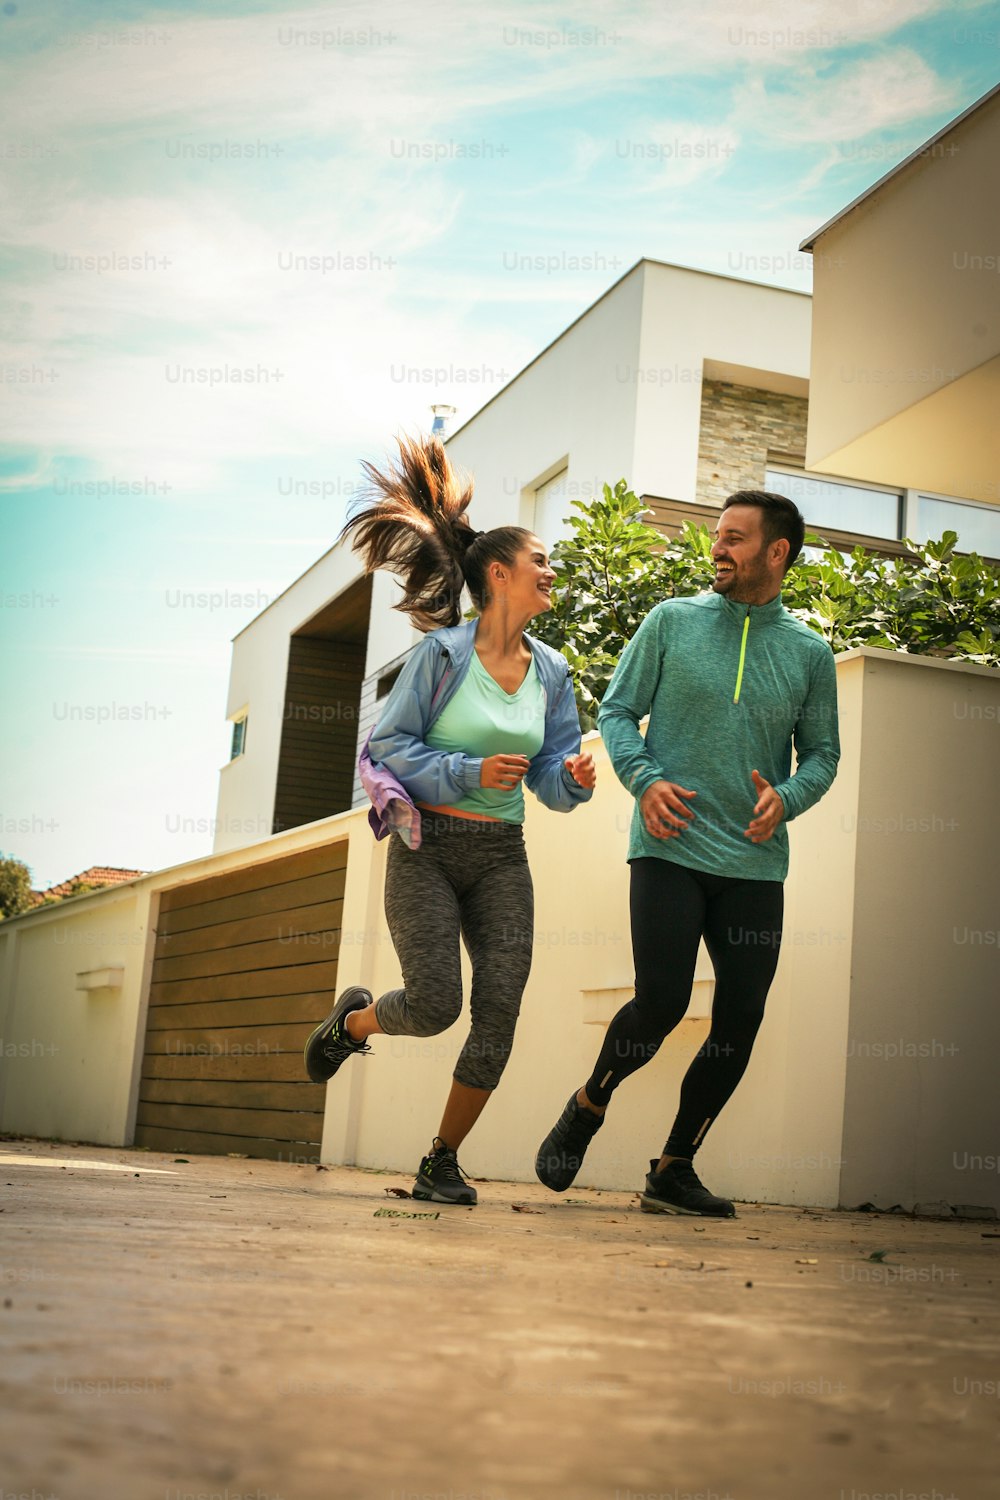 Young couple running together on sidewalk. Young people exercising.